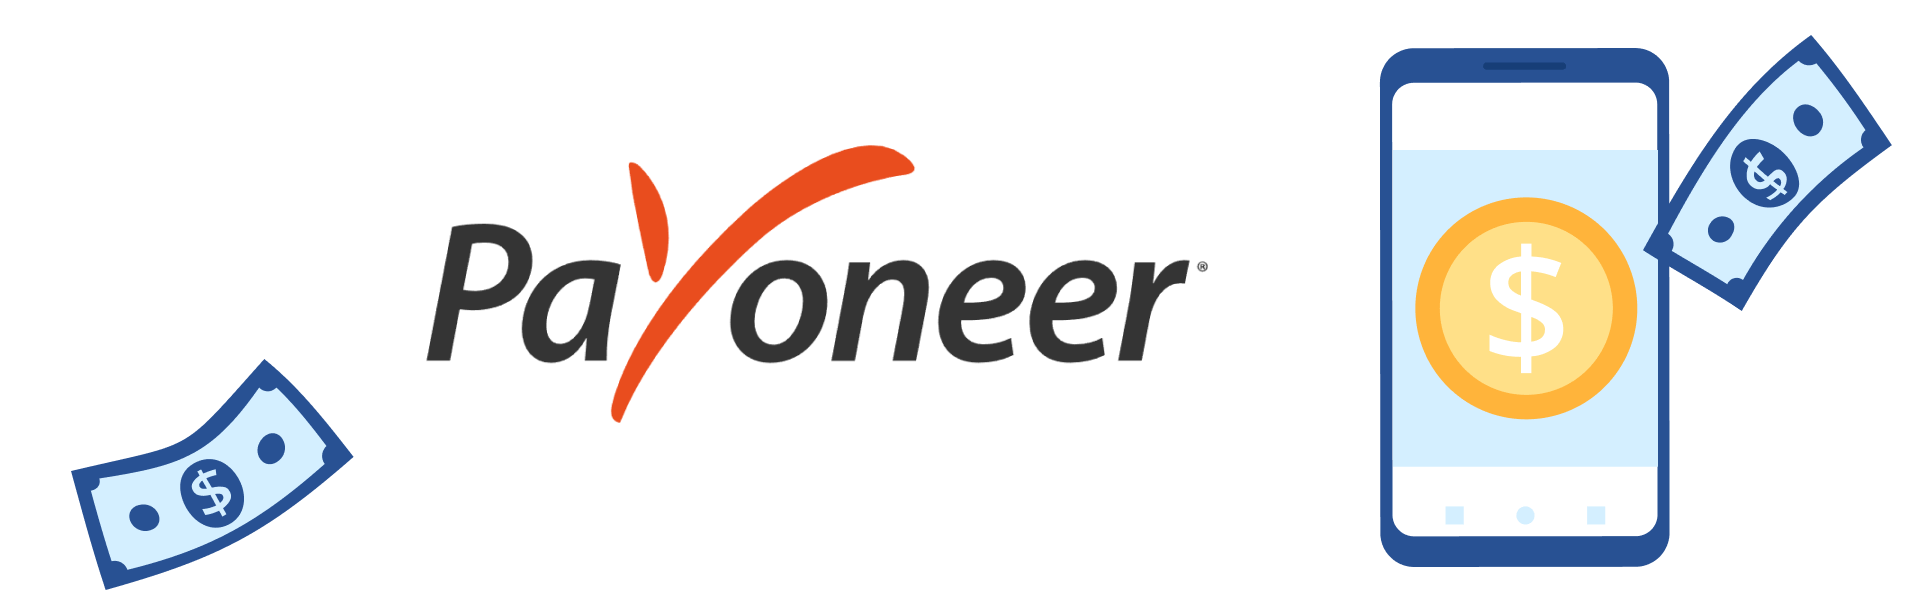 Payoneer is considered best for SMEs thanks for being simple to use and applicable, allowing to make online\offline payments regardless of location on short notice.